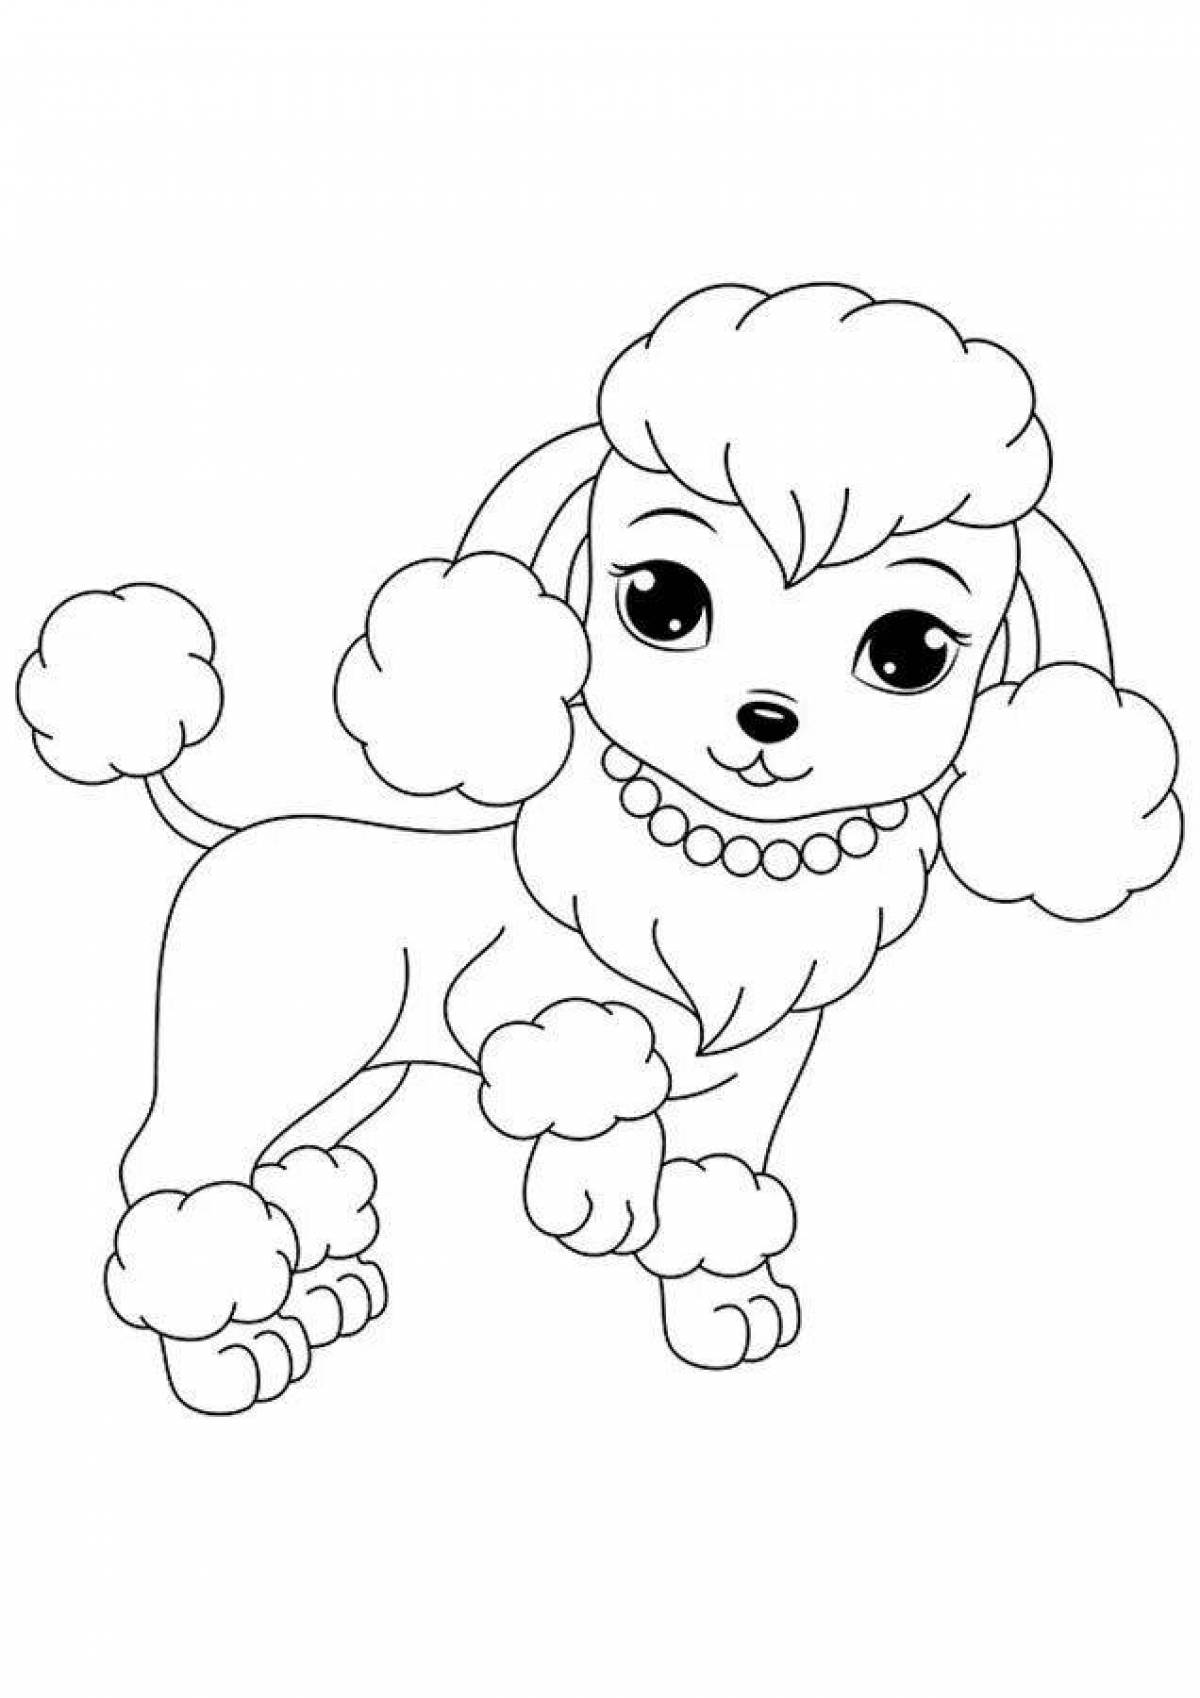 Coloring cute dog